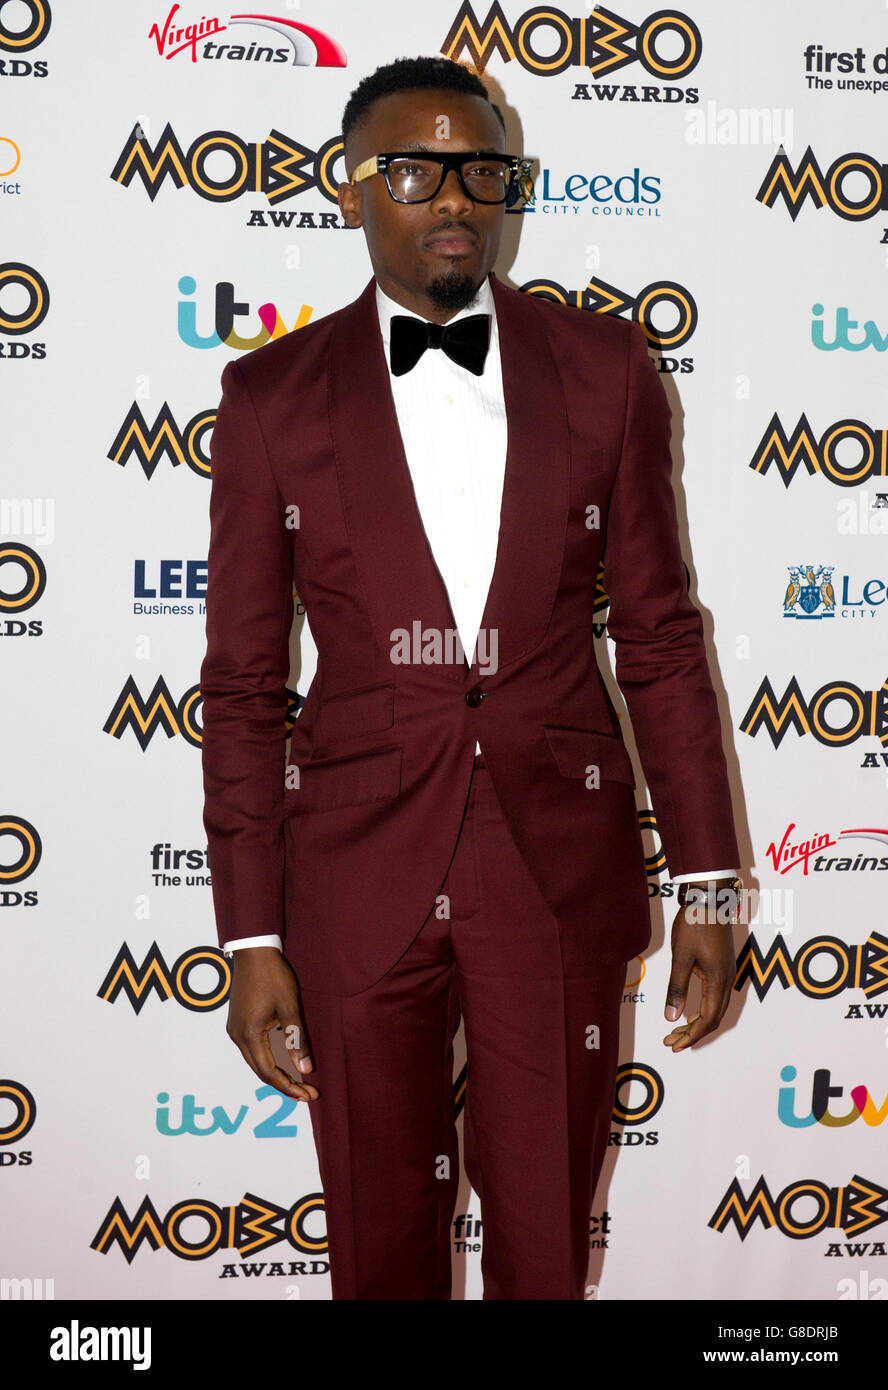 Shaker arriving at the Mobo Awards 2015, held at the First Direct Arena, Leeds. PRESS ASSOCIATION Photo. See PA story SHOWBIZ Mobos. Picture date: Wednesday November 4, 2015. Photo credit should read: Katja Ogrin/PA Wire Stock Photo